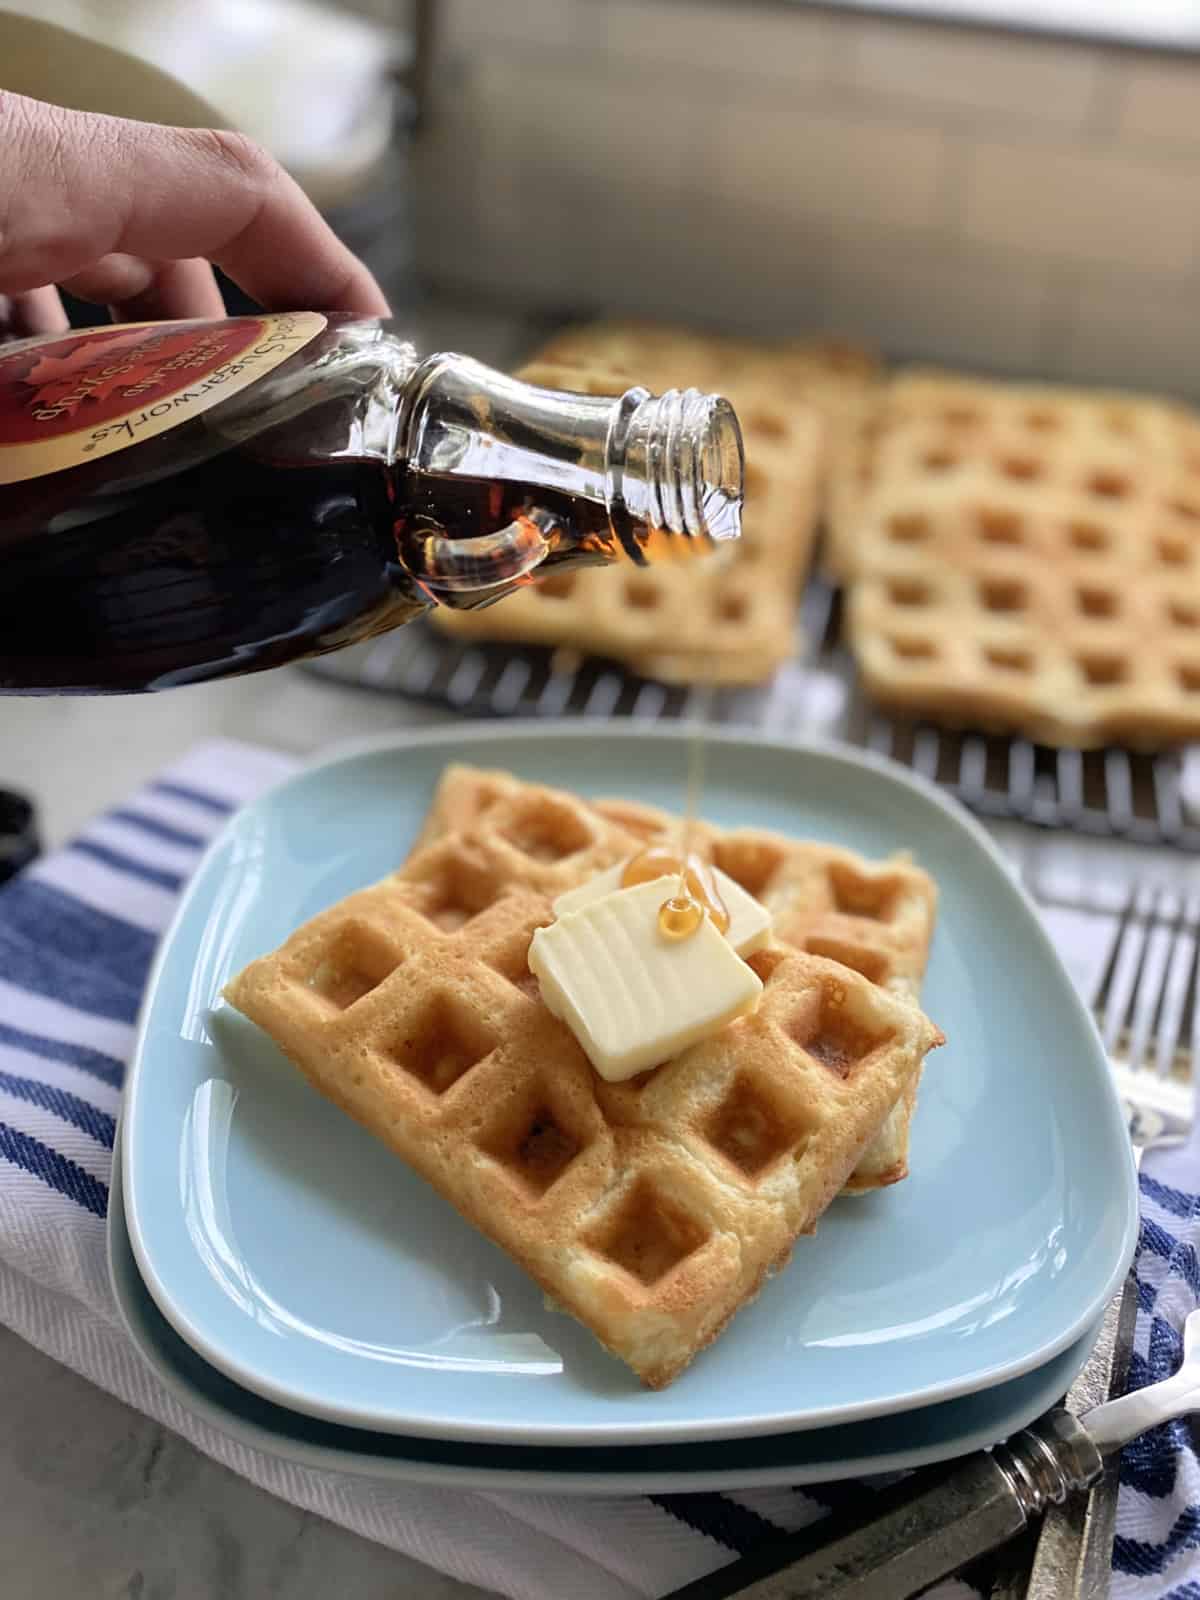 Male hand pouring maple syrip on to two waffles on a blue plate.